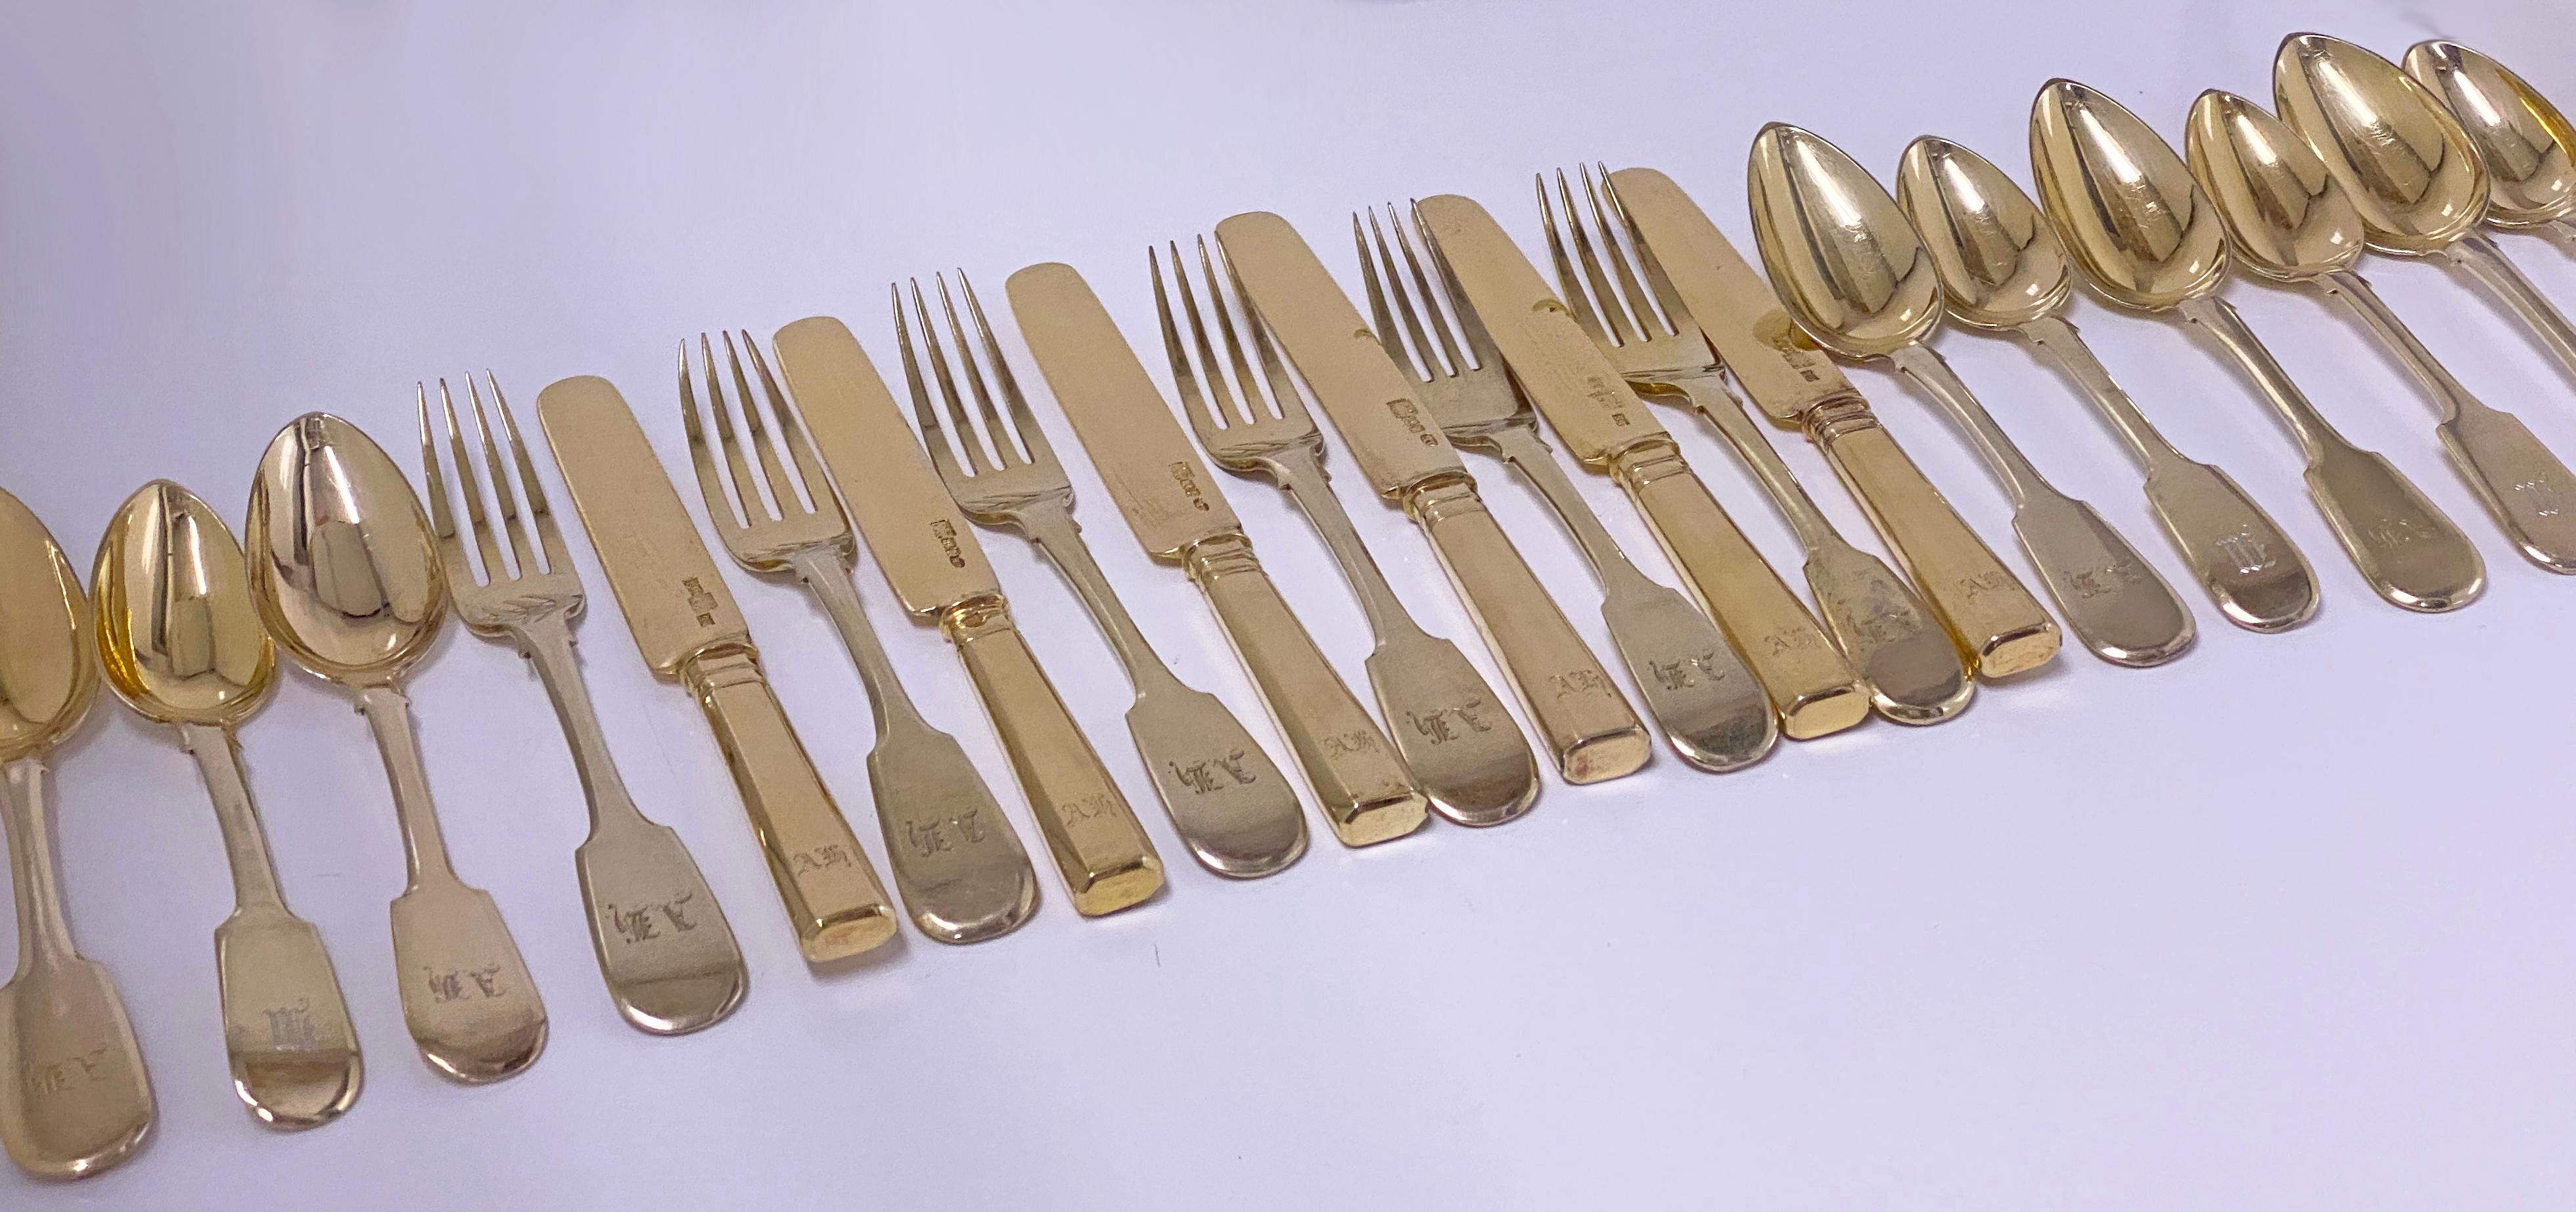 Antique Russian Silver Gilt Lunch Dessert fruit set St Petersburg 1857-61. The set comprising 6 Knives (7.25 inches), 6 forks (6.5 inches), 6 dessert spoons (6.125 inches) and 5 teaspoons (5.75 inches). Each with initial AB or M. 5 larger spoons